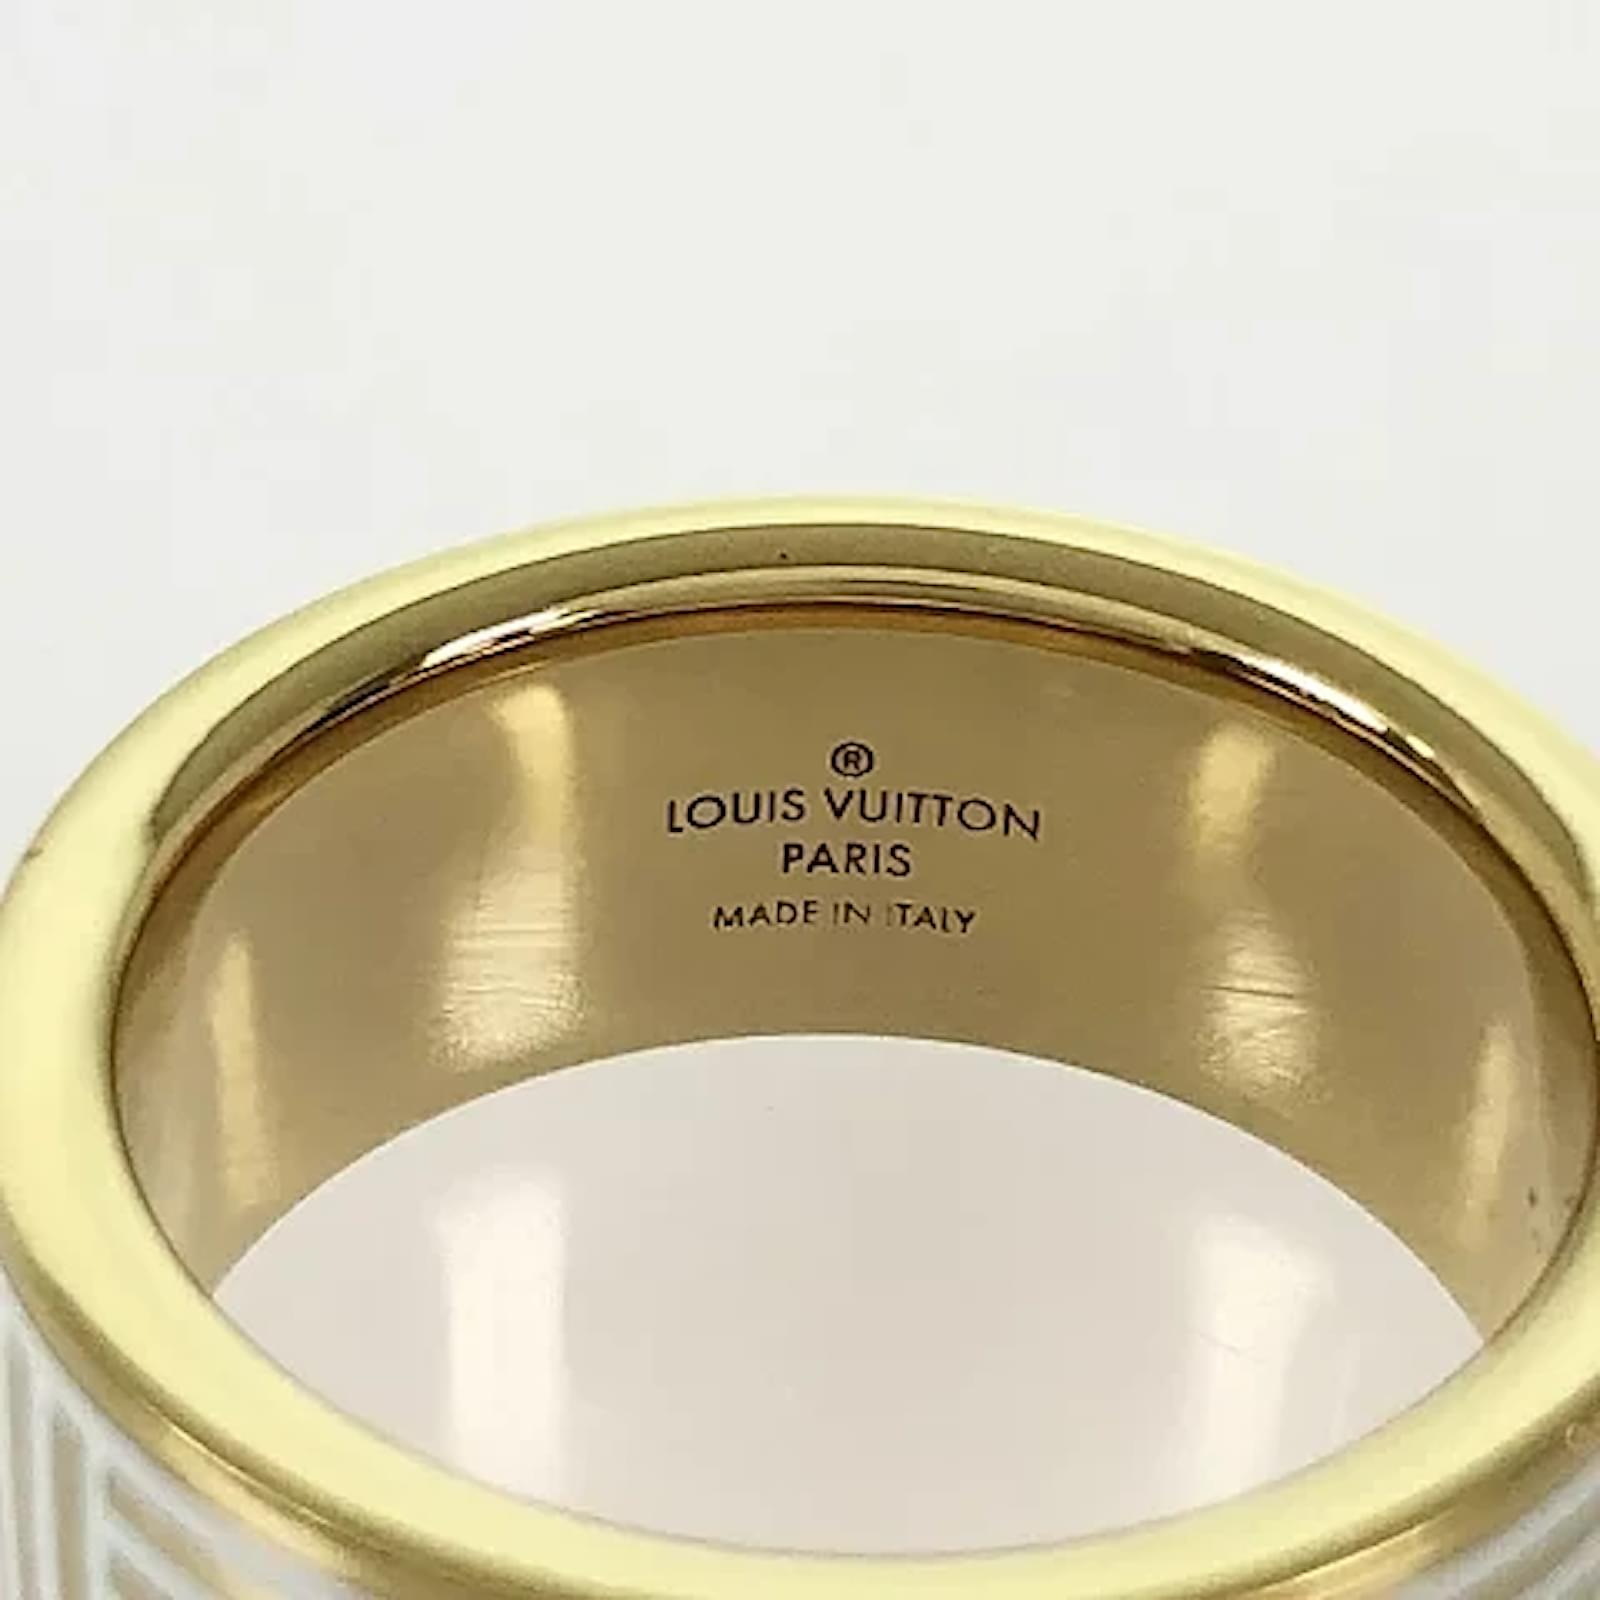 Authenticated used Louis Vuitton Louis Vuitton Ring Berg Metal E Boa M65340 About 17 Metal/Wood Men's, Size: One size, Silver